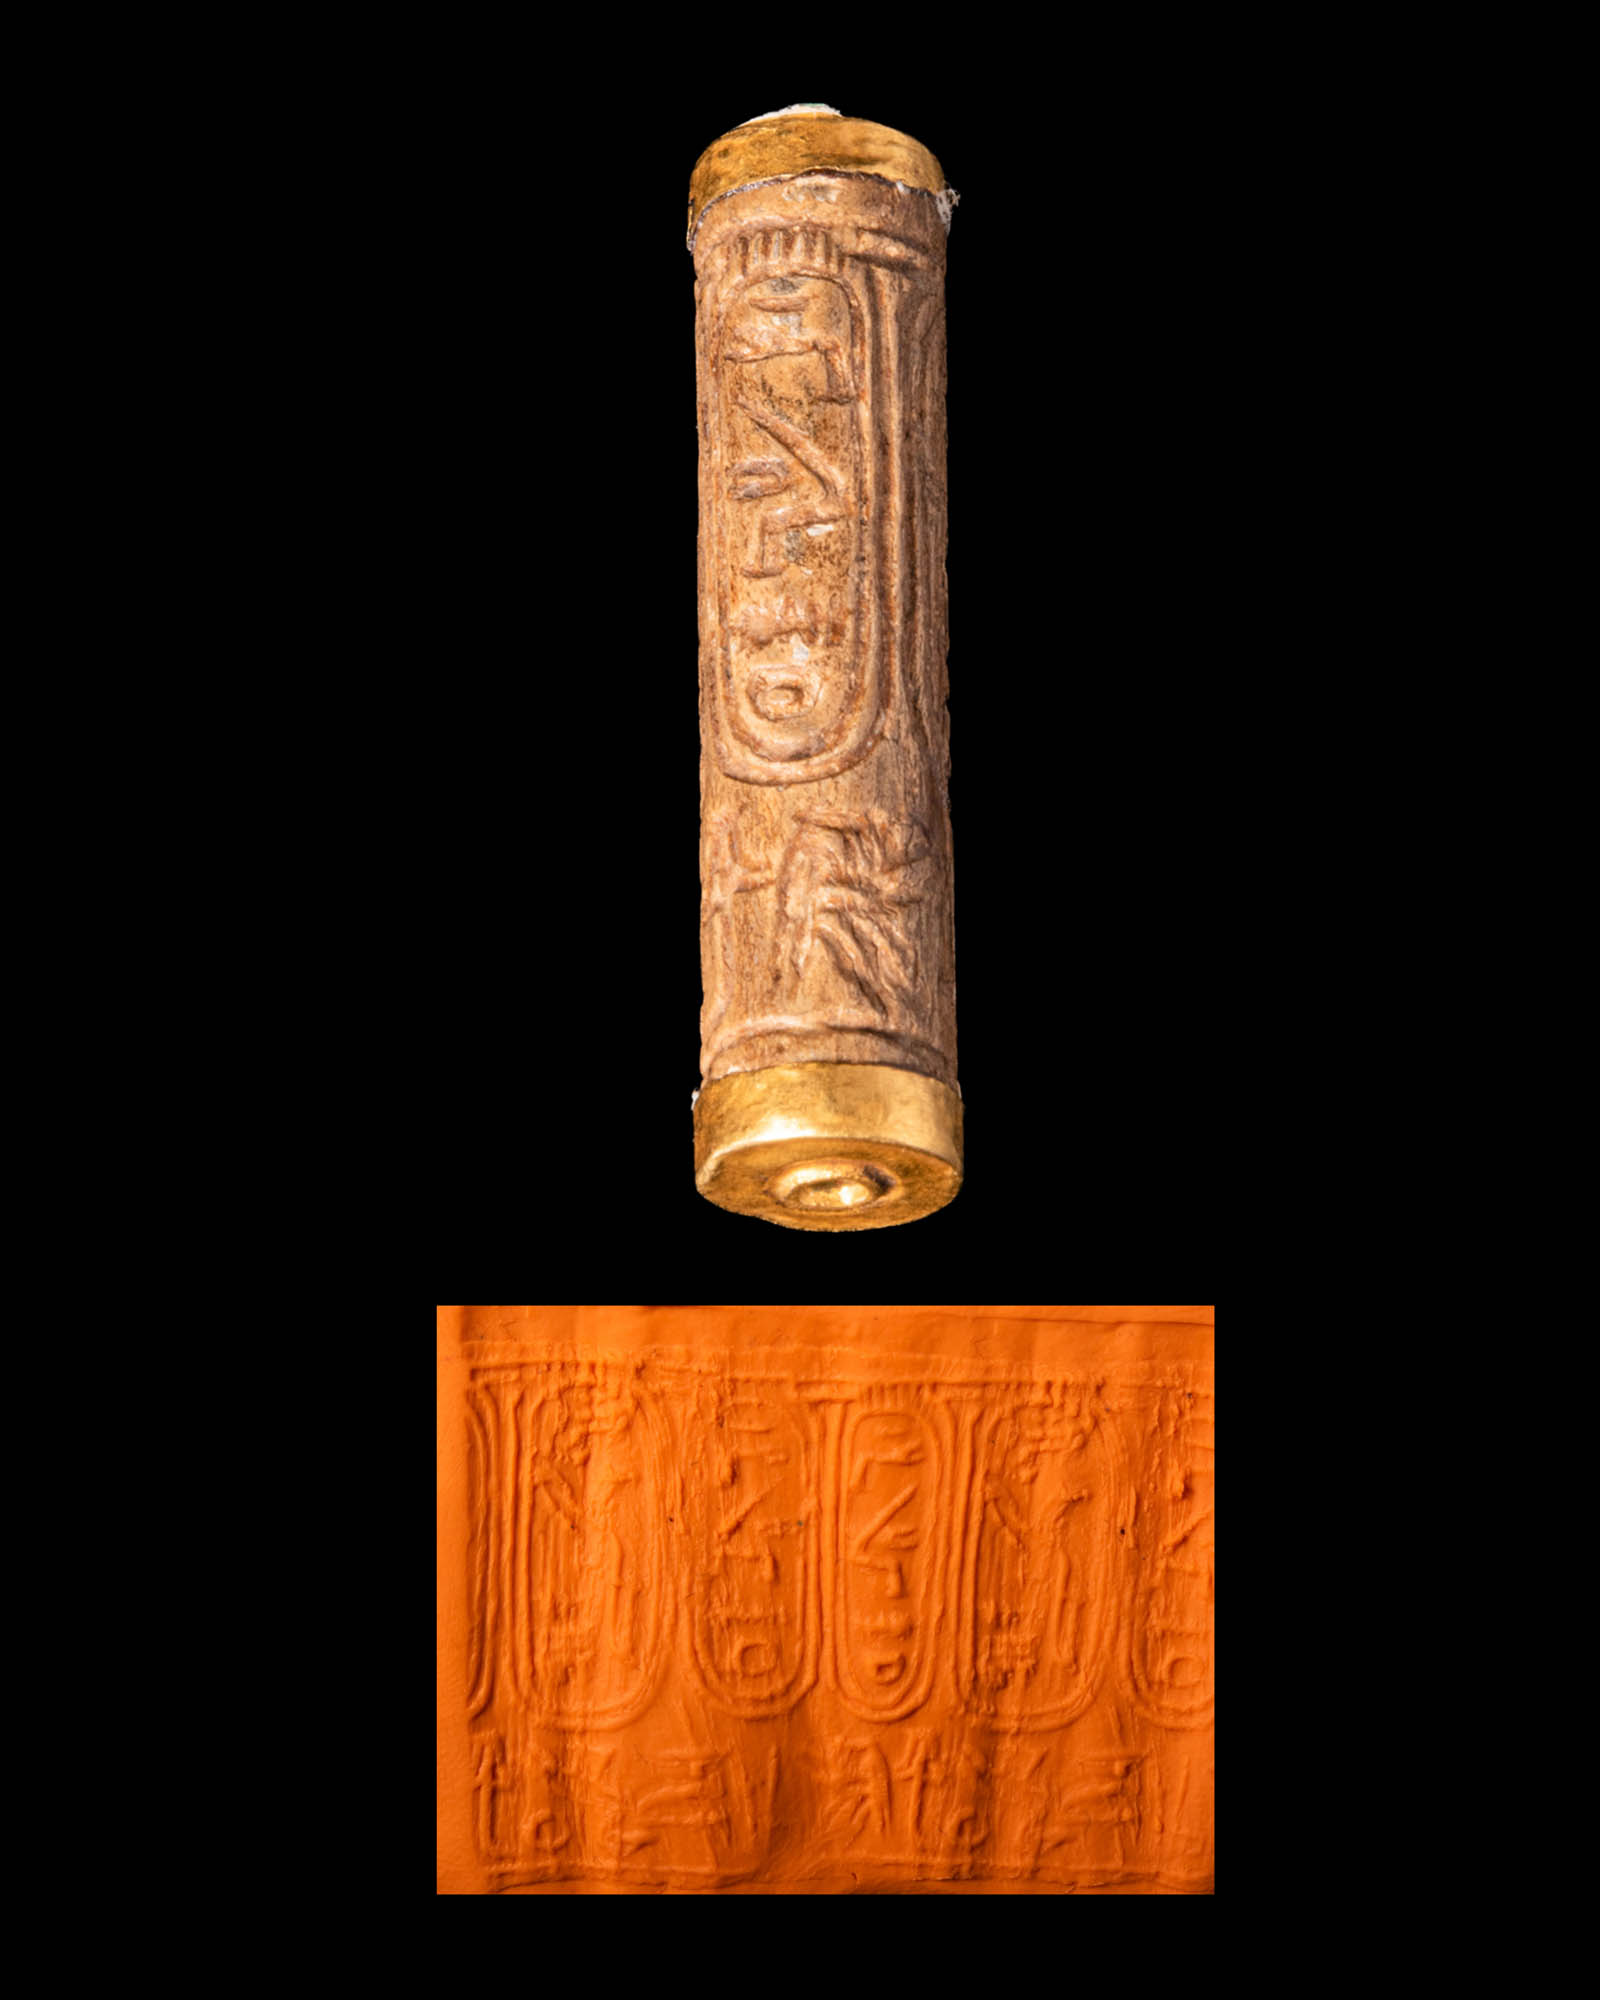 EGYPTIAN STEATITE CYLINDER SEAL WITH GOLD CAPS